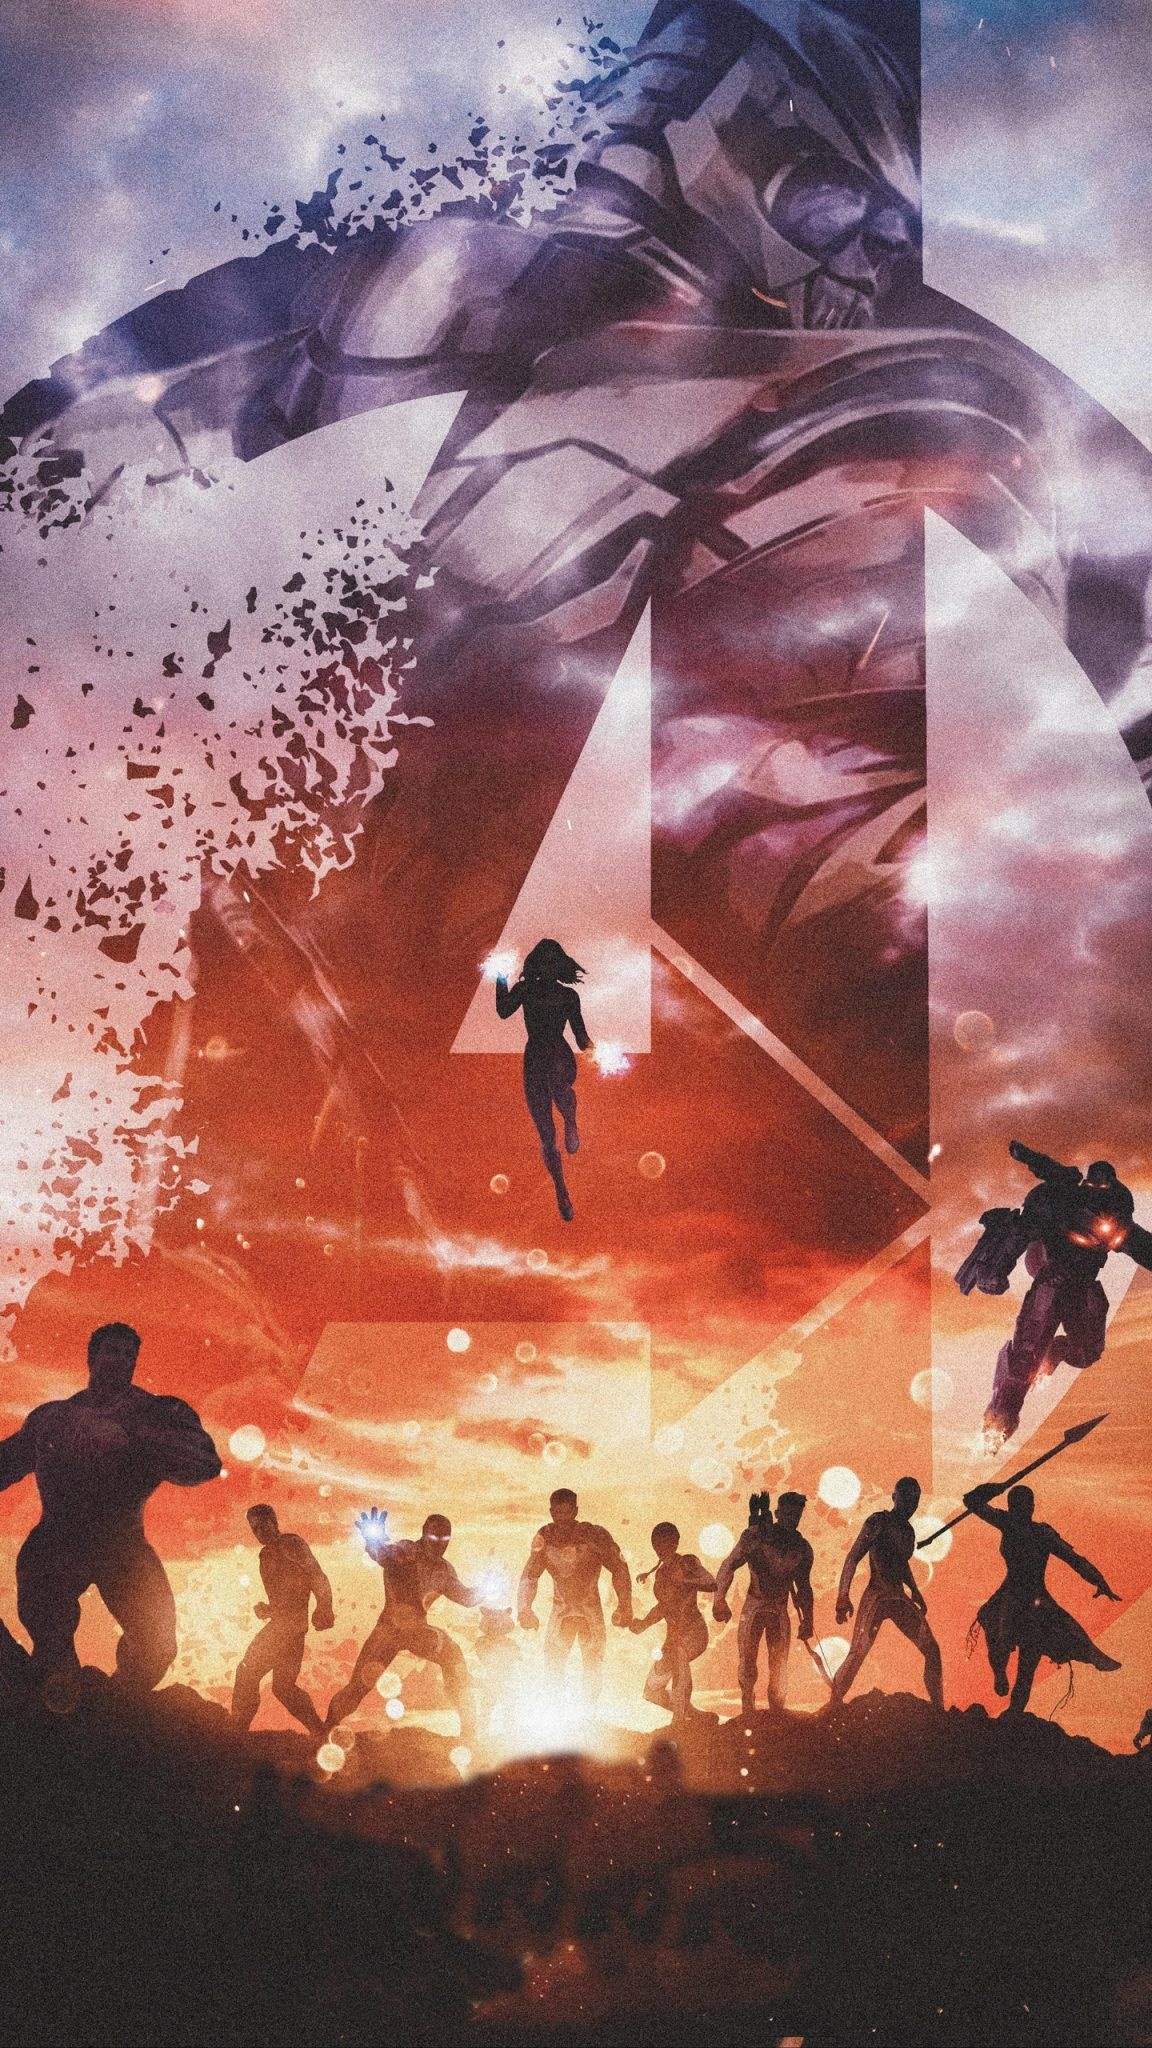 MCU (Comics), Avengers mobile wallpapers, Pinterest boards, Marvel movie posters, 1160x2050 HD Handy